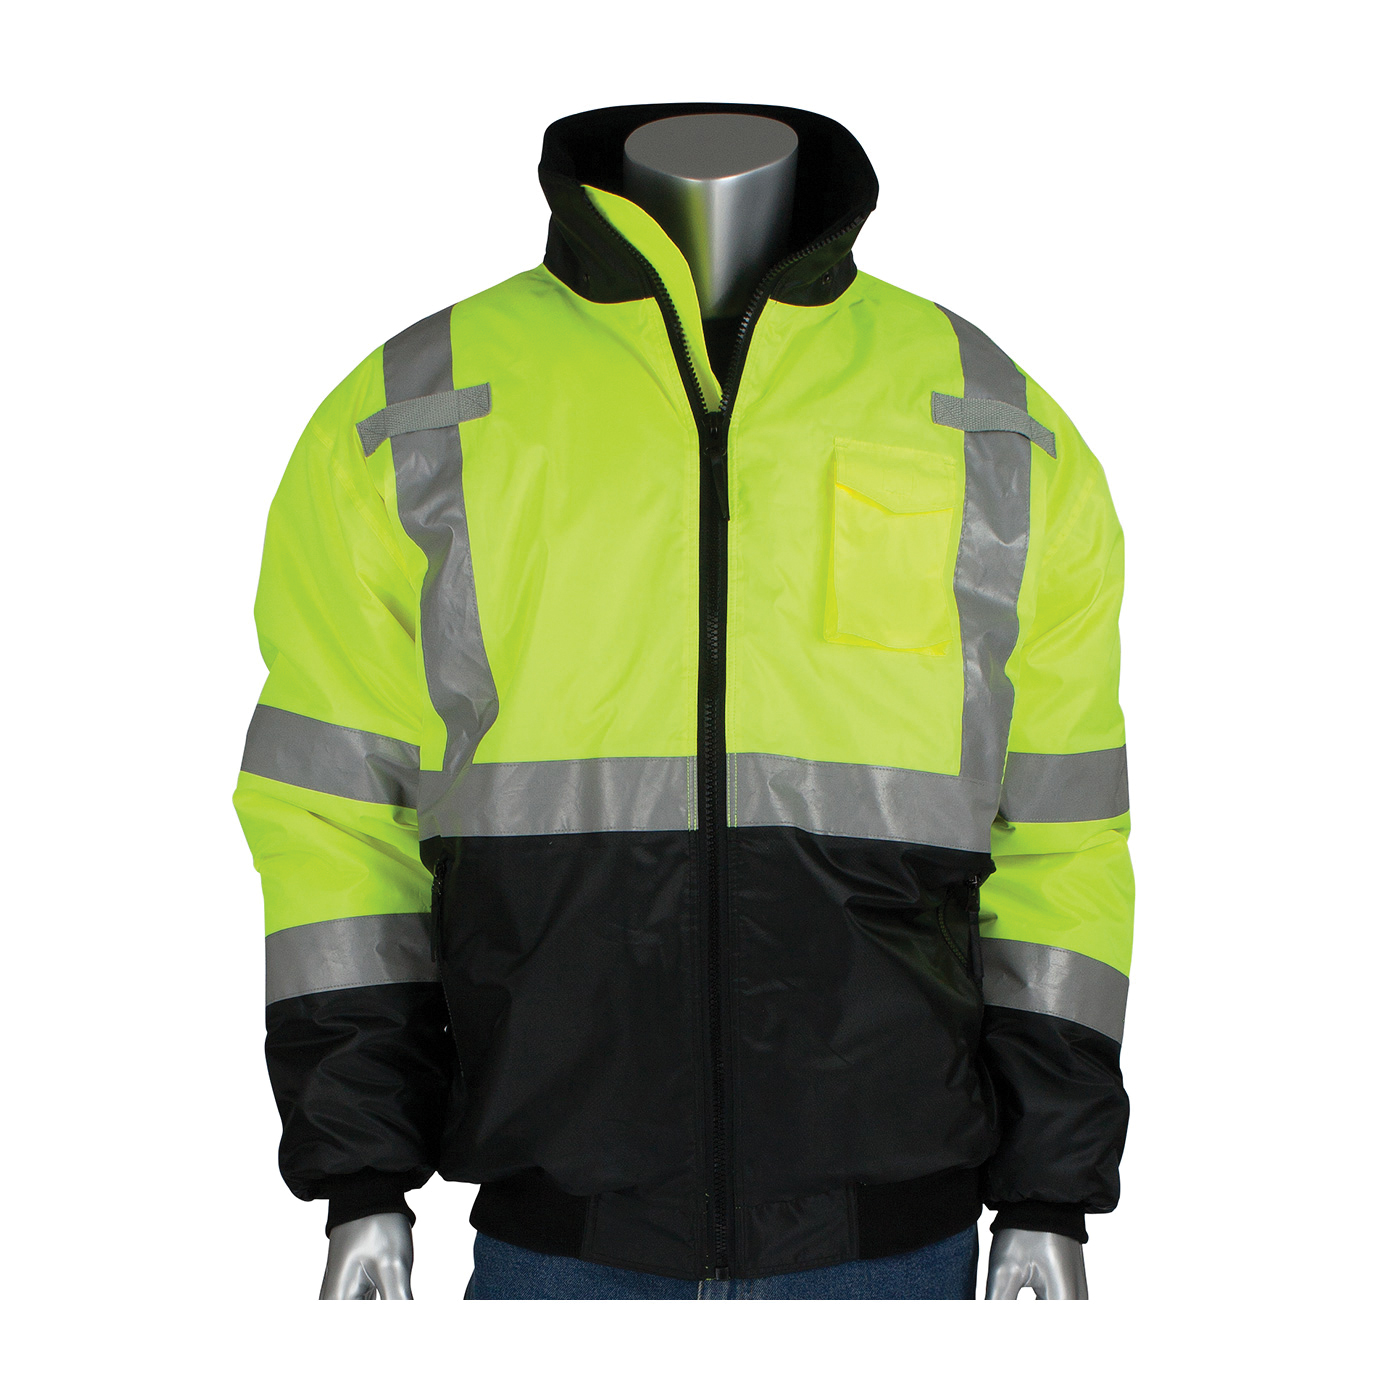 PIP® 333-1740-LY/2X Bomber Jacket, Black/Hi-Viz Lime Yellow, Polyester, 63 in Chest, Resists: Water, ANSI Type R Class 3